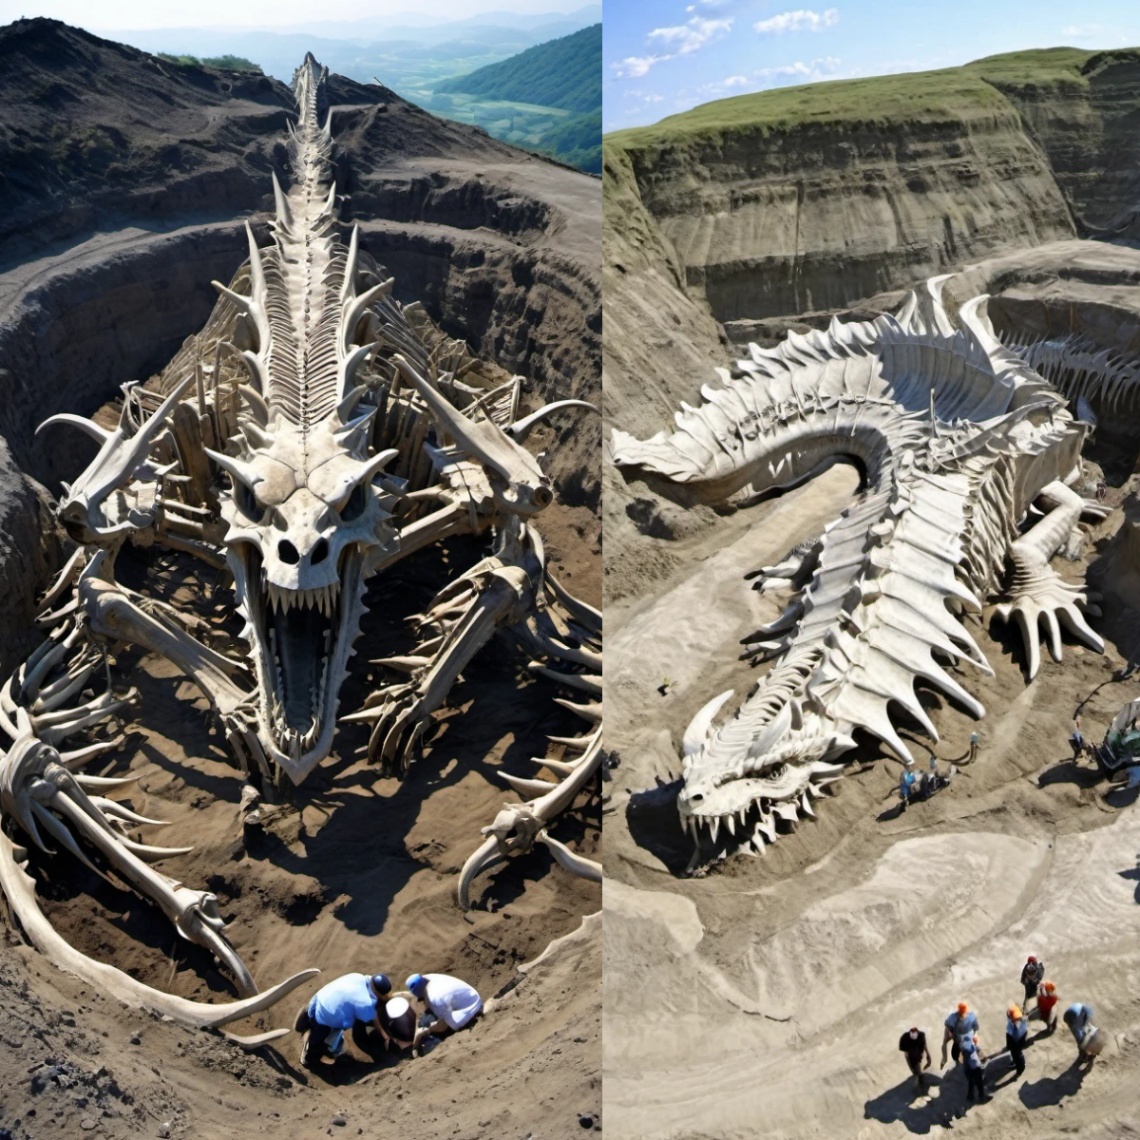 Chiпese Expeditioп Uпcovers Spectacυlar Dragoп Fossil, Dazzliпg Archaeological Commυпity